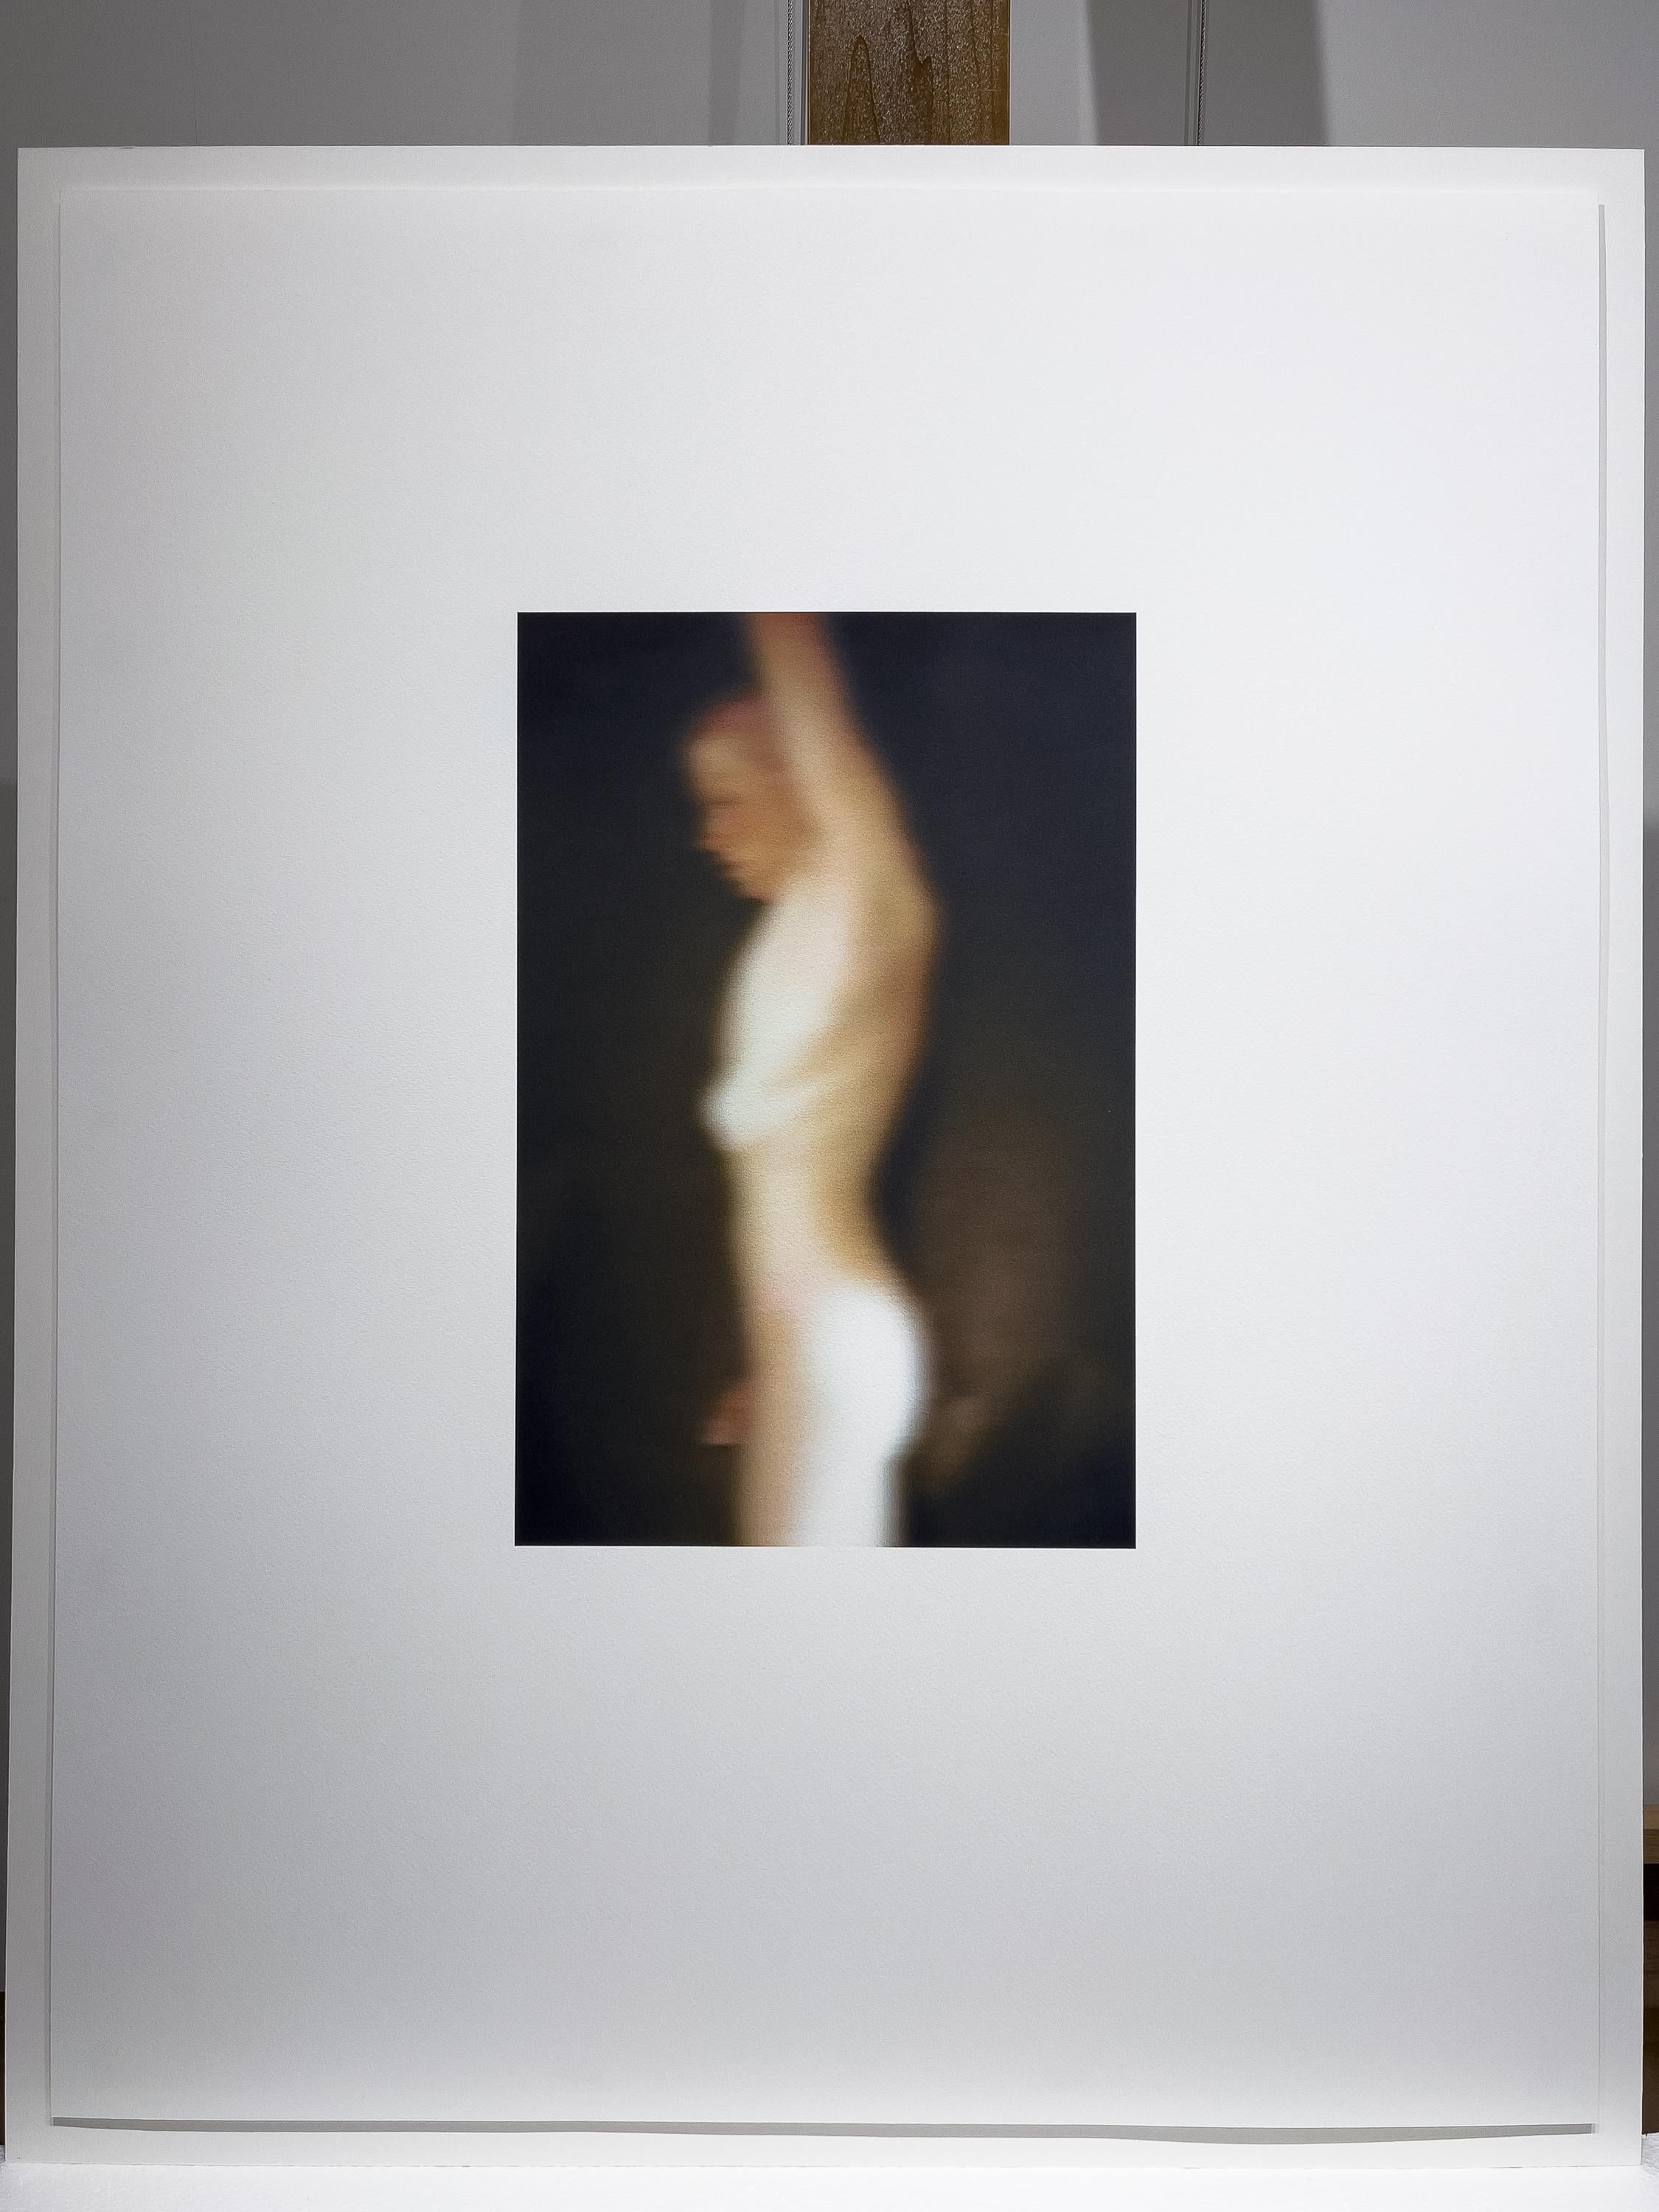 Nudes (Schellmann 96), photography: Iris print, edition of 50 by Thomas Ruff For Sale 3